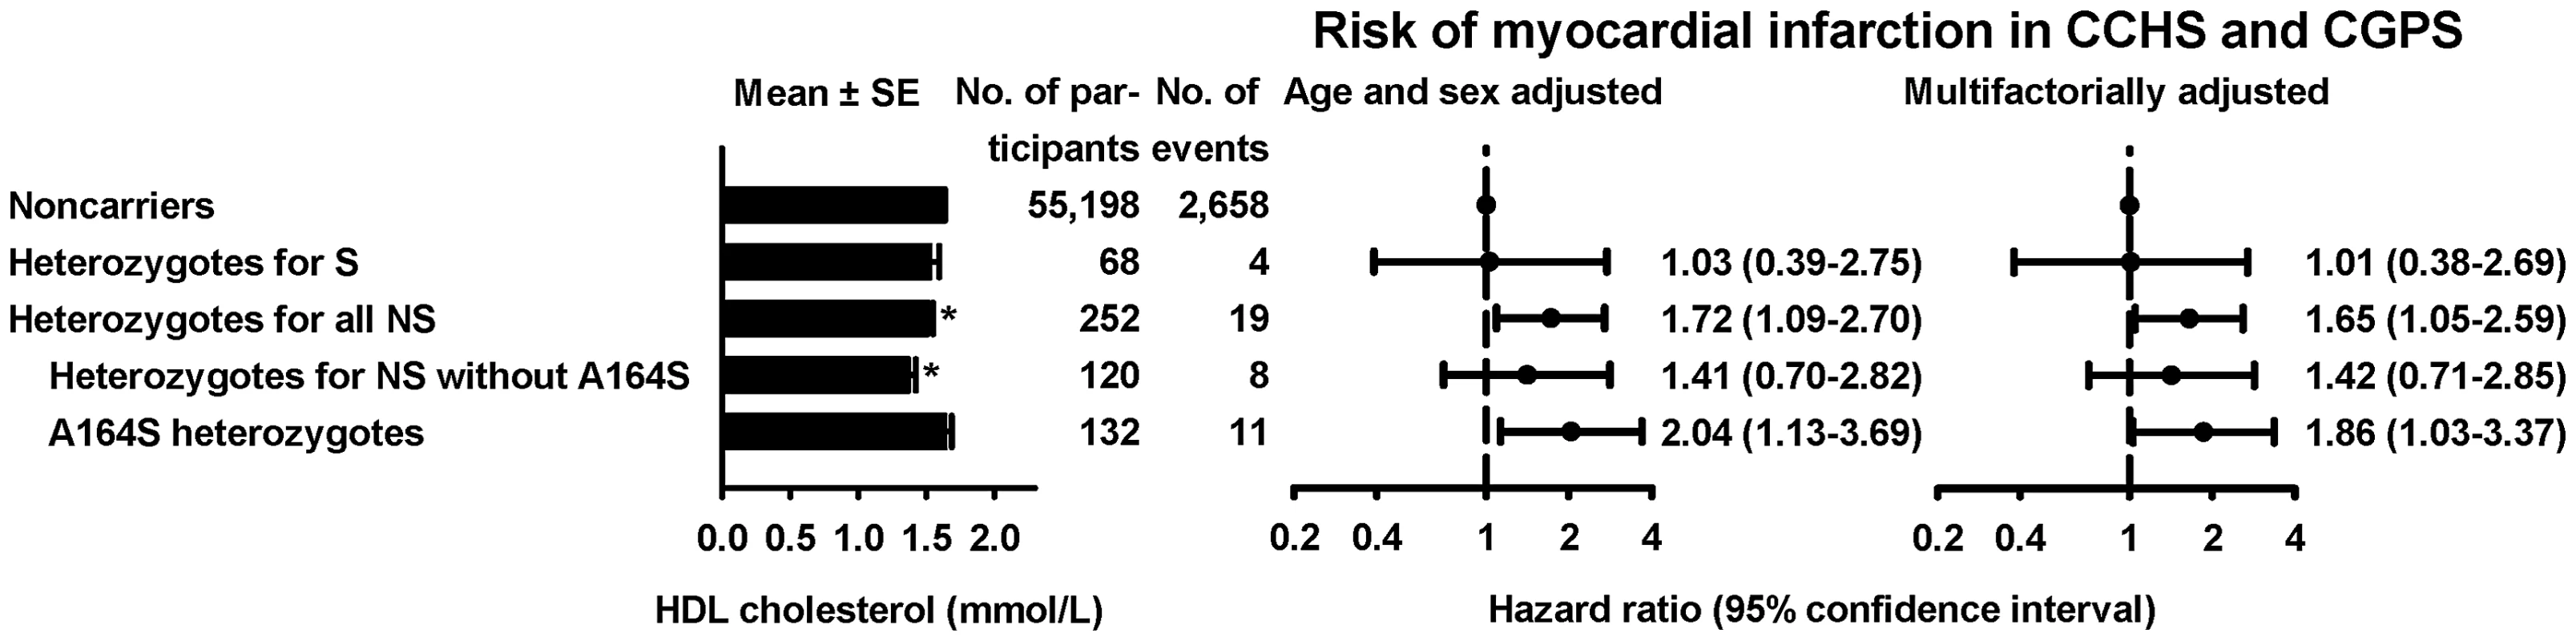 HDL cholesterol levels and risk of myocardial infarction for heterozygotes for synonymous (S) or nonsynonymous (NS) variants in <i>APOA1</i>.